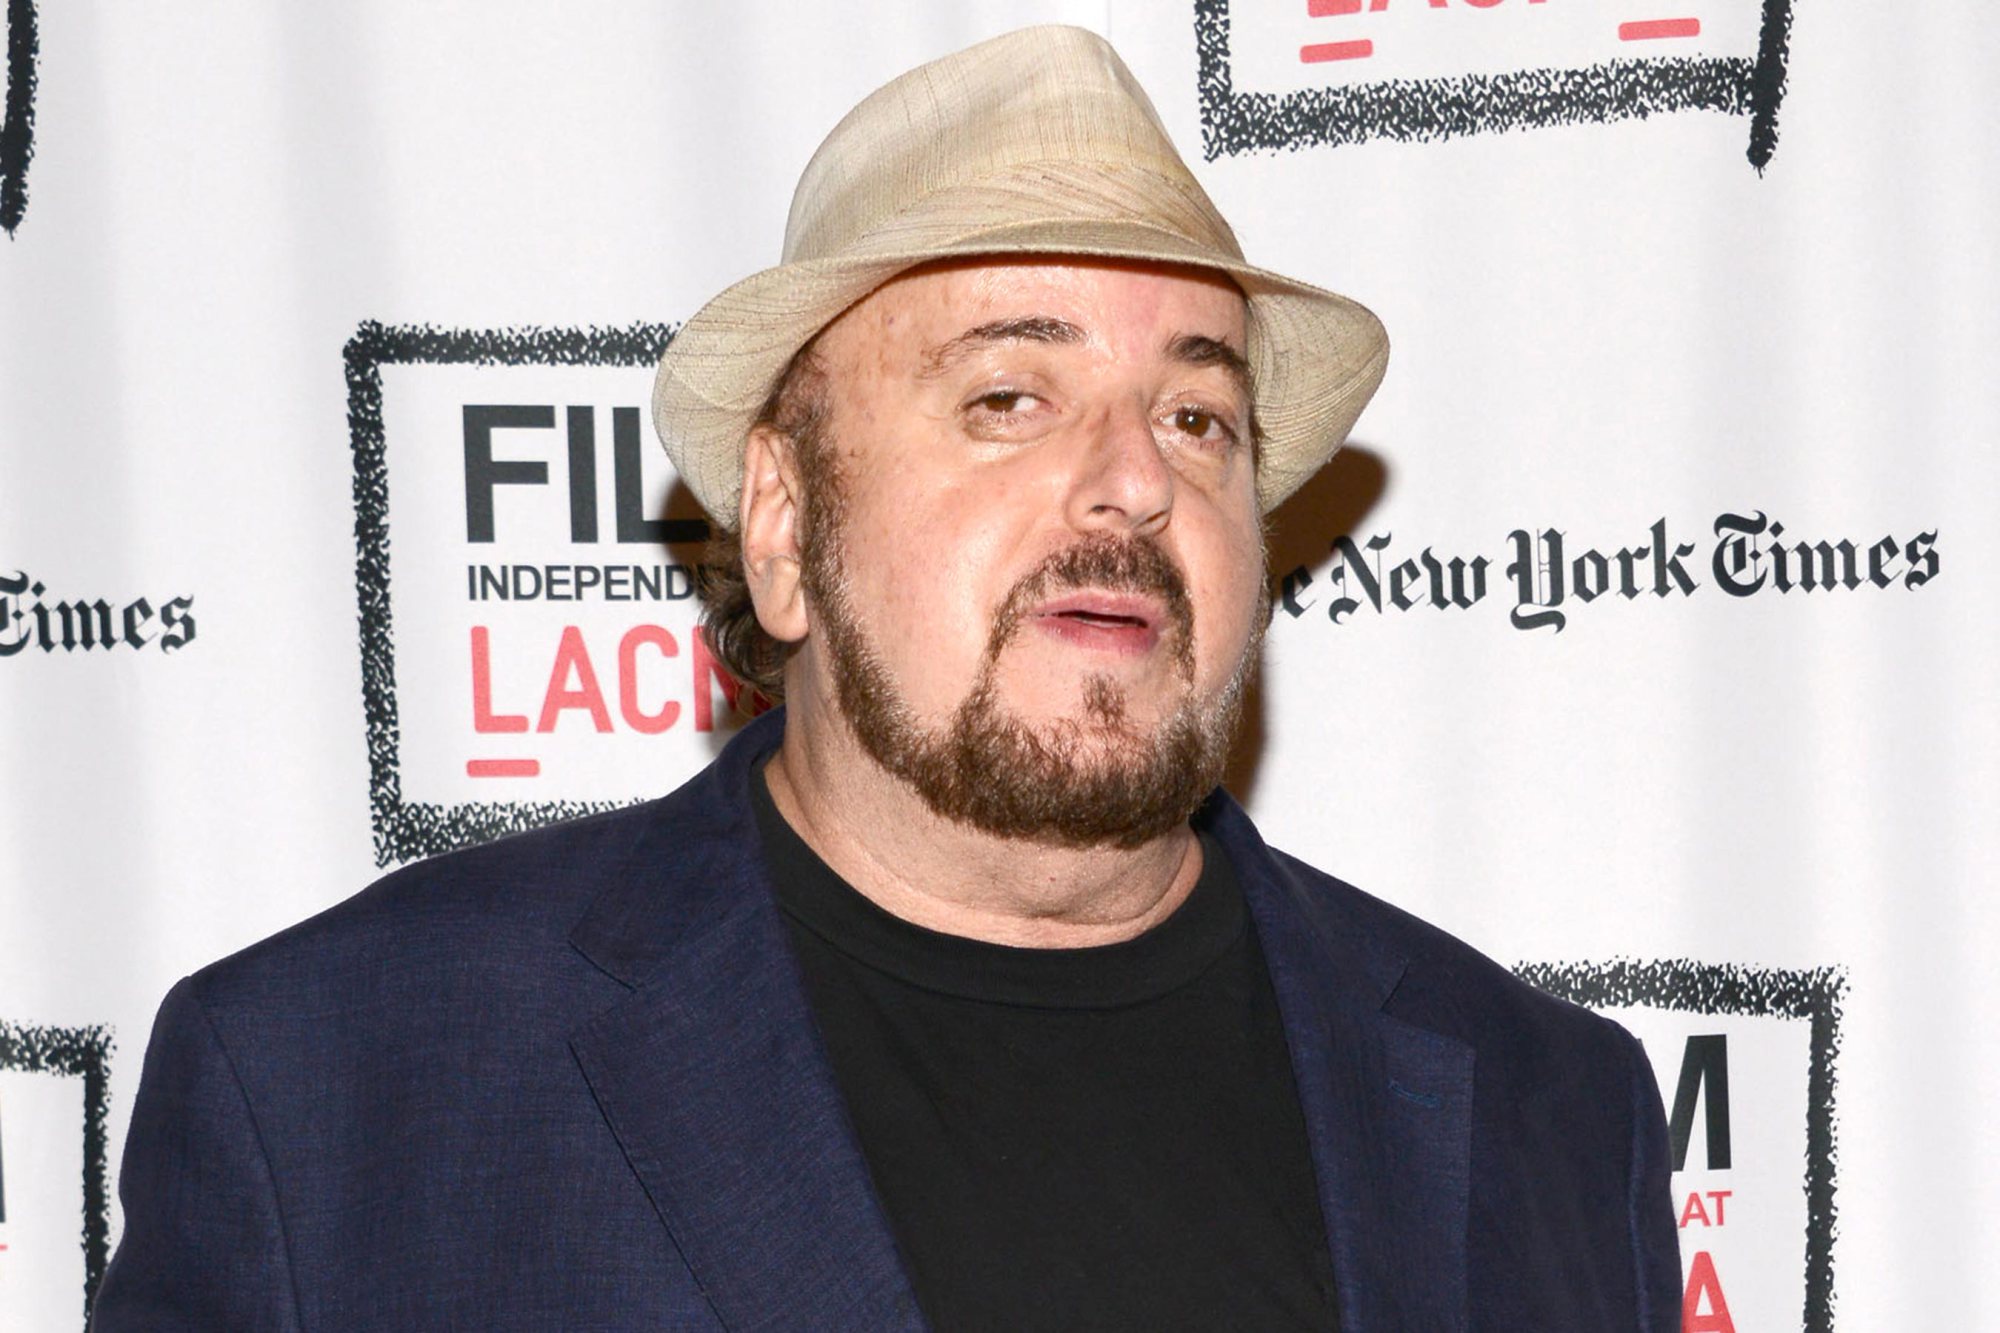 38 Women Accuse Movie Director James Toback Of Sexual Harassment